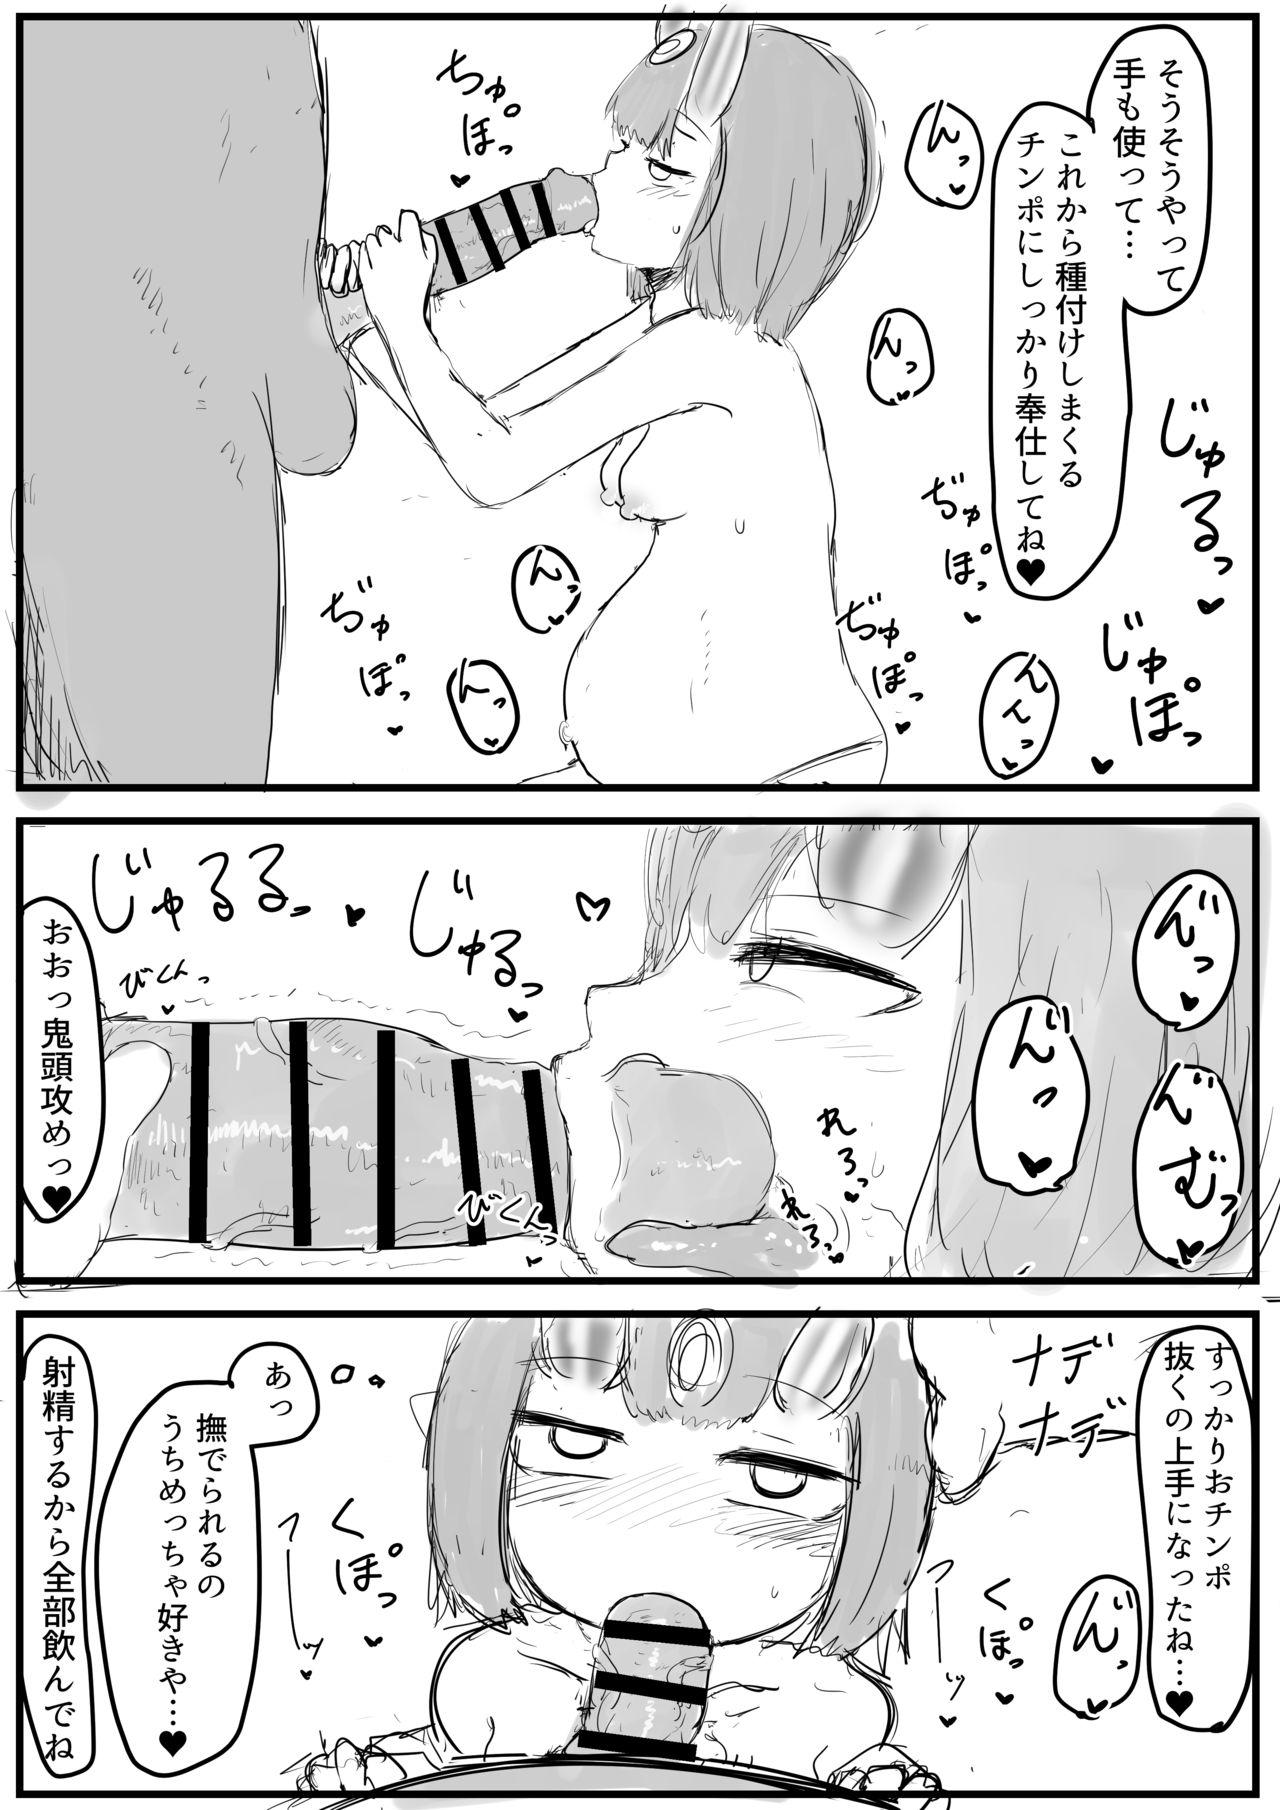 Oral Sex Porn ボテ腹酒吞童子ちゃんご出産 - Fate grand order Pack - Page 2